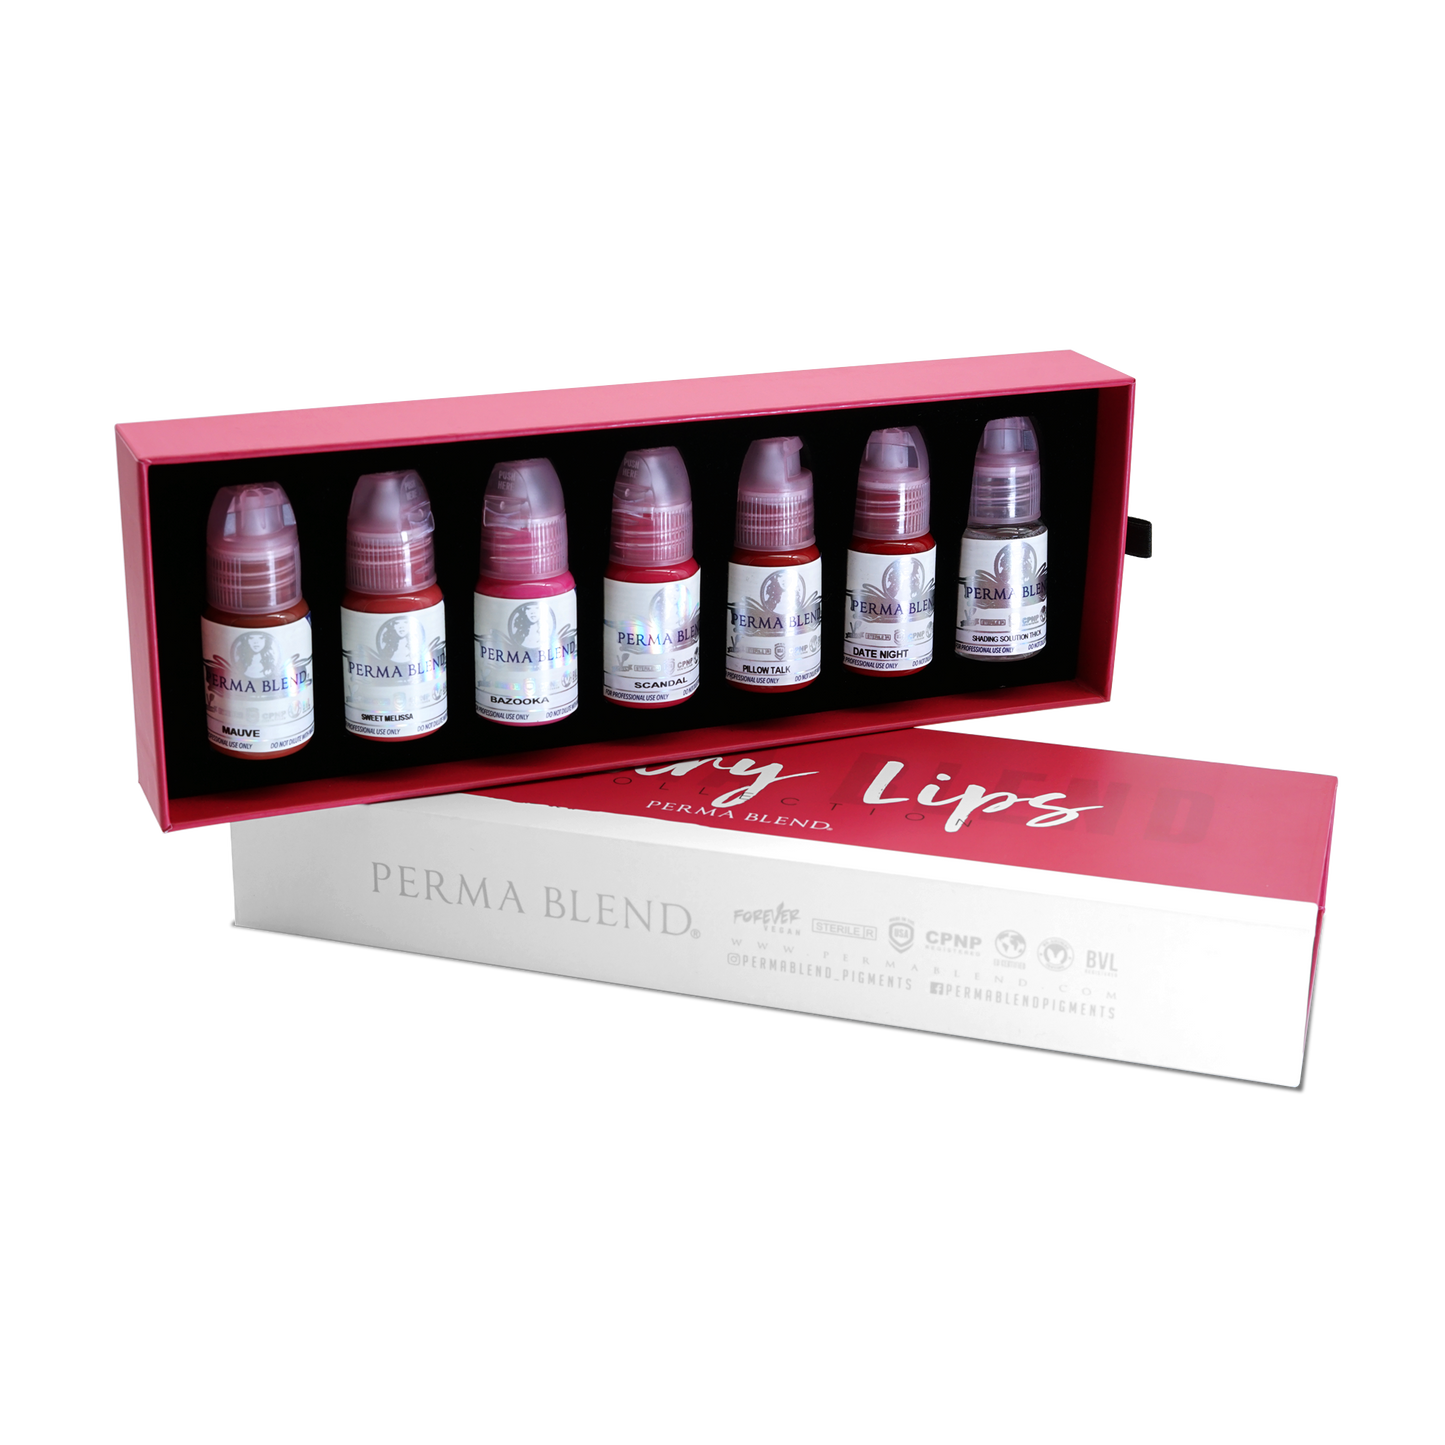 Sultry Lips Kit